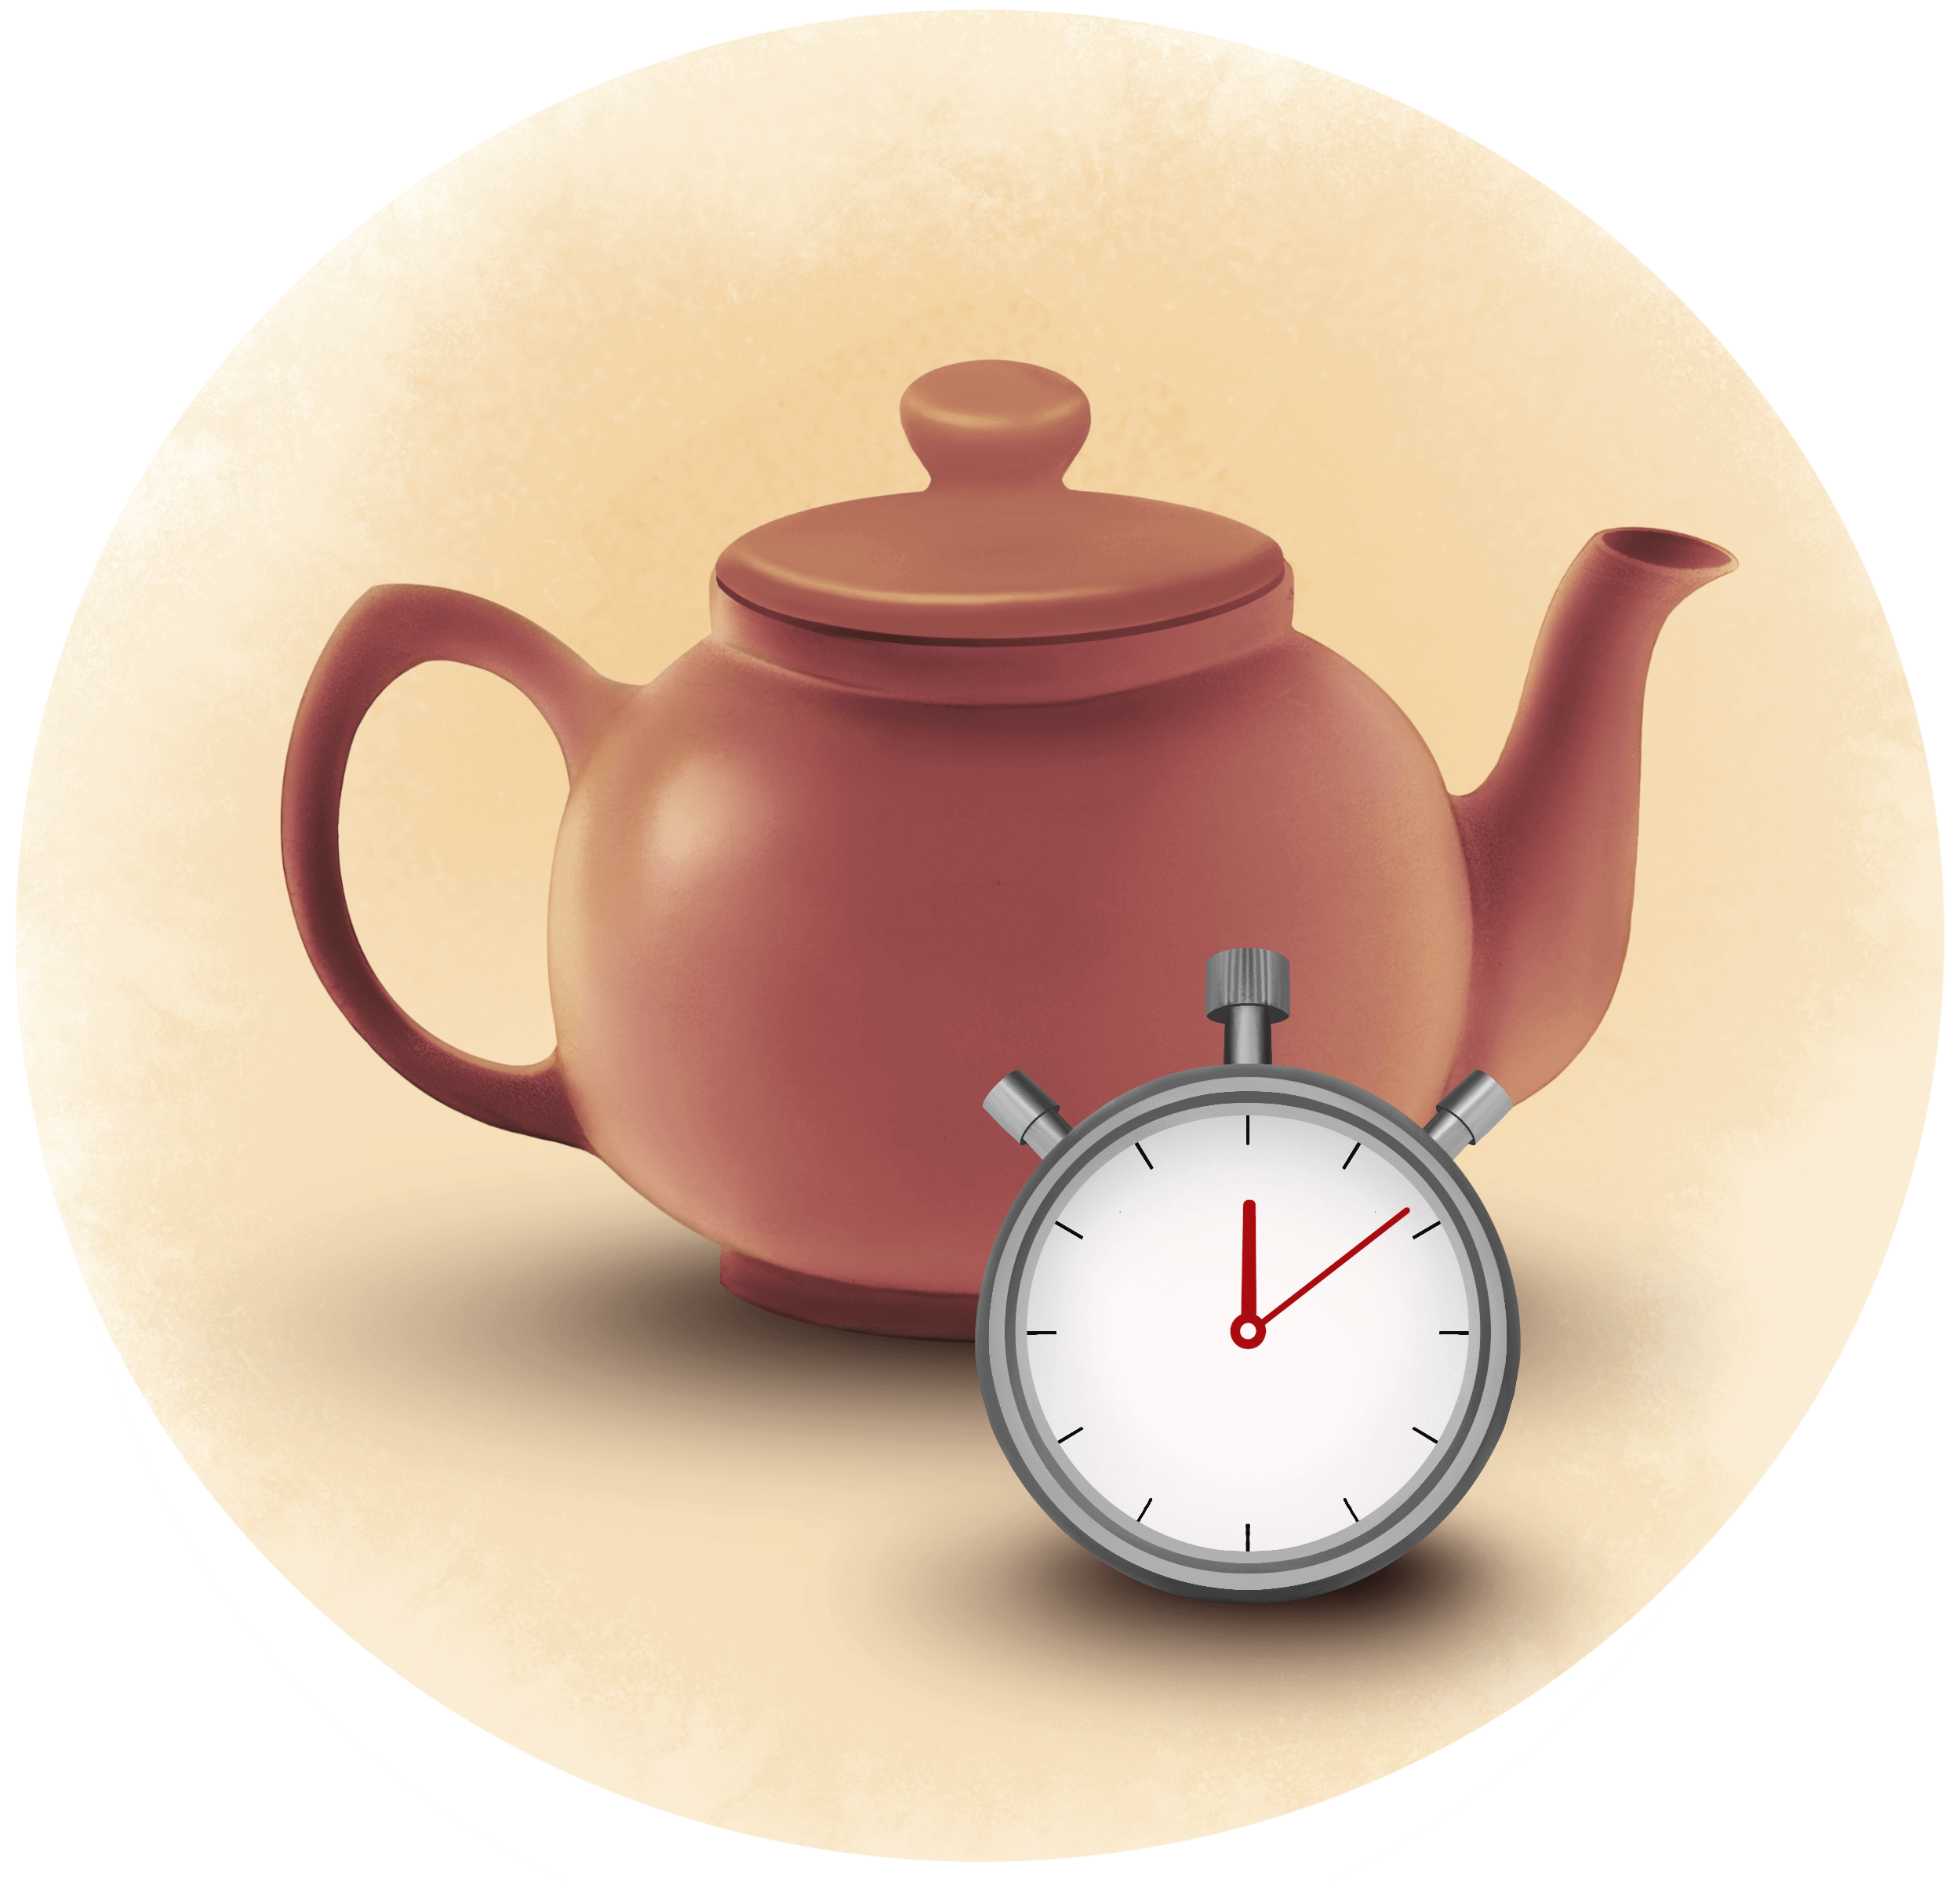 An image of a timer and a teapot